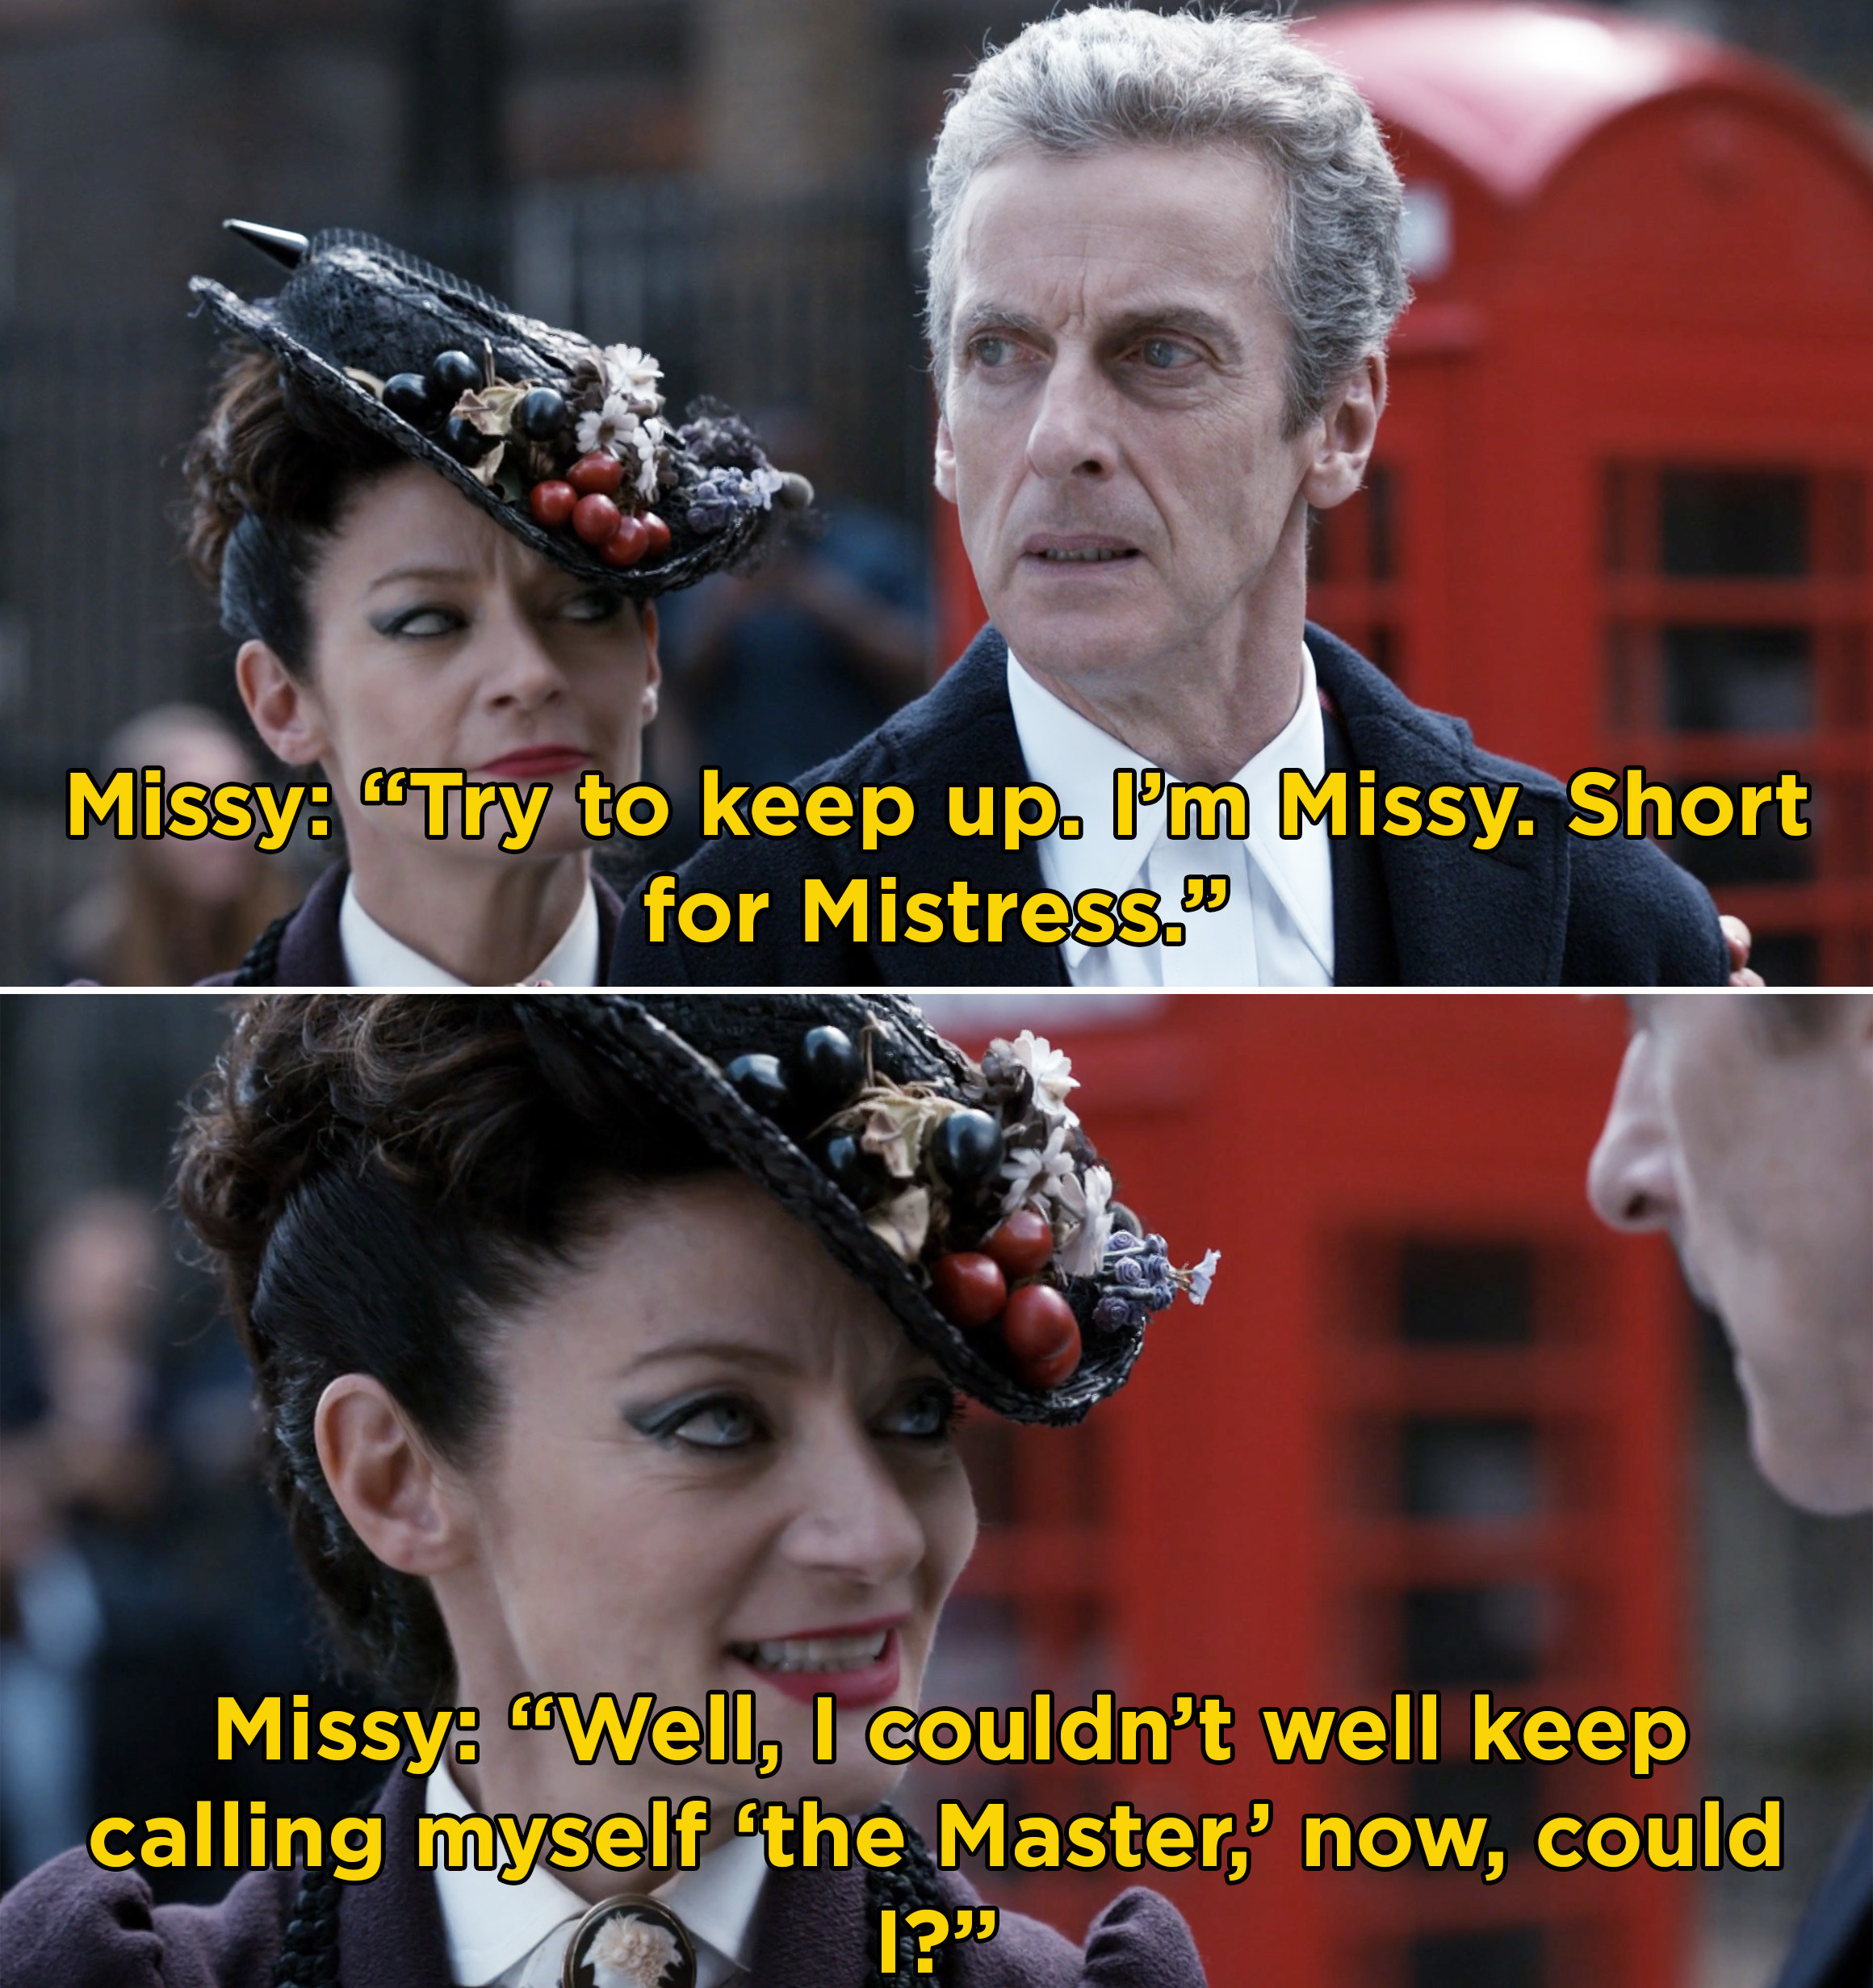 Missy revealing herself to the Doctor as the Master